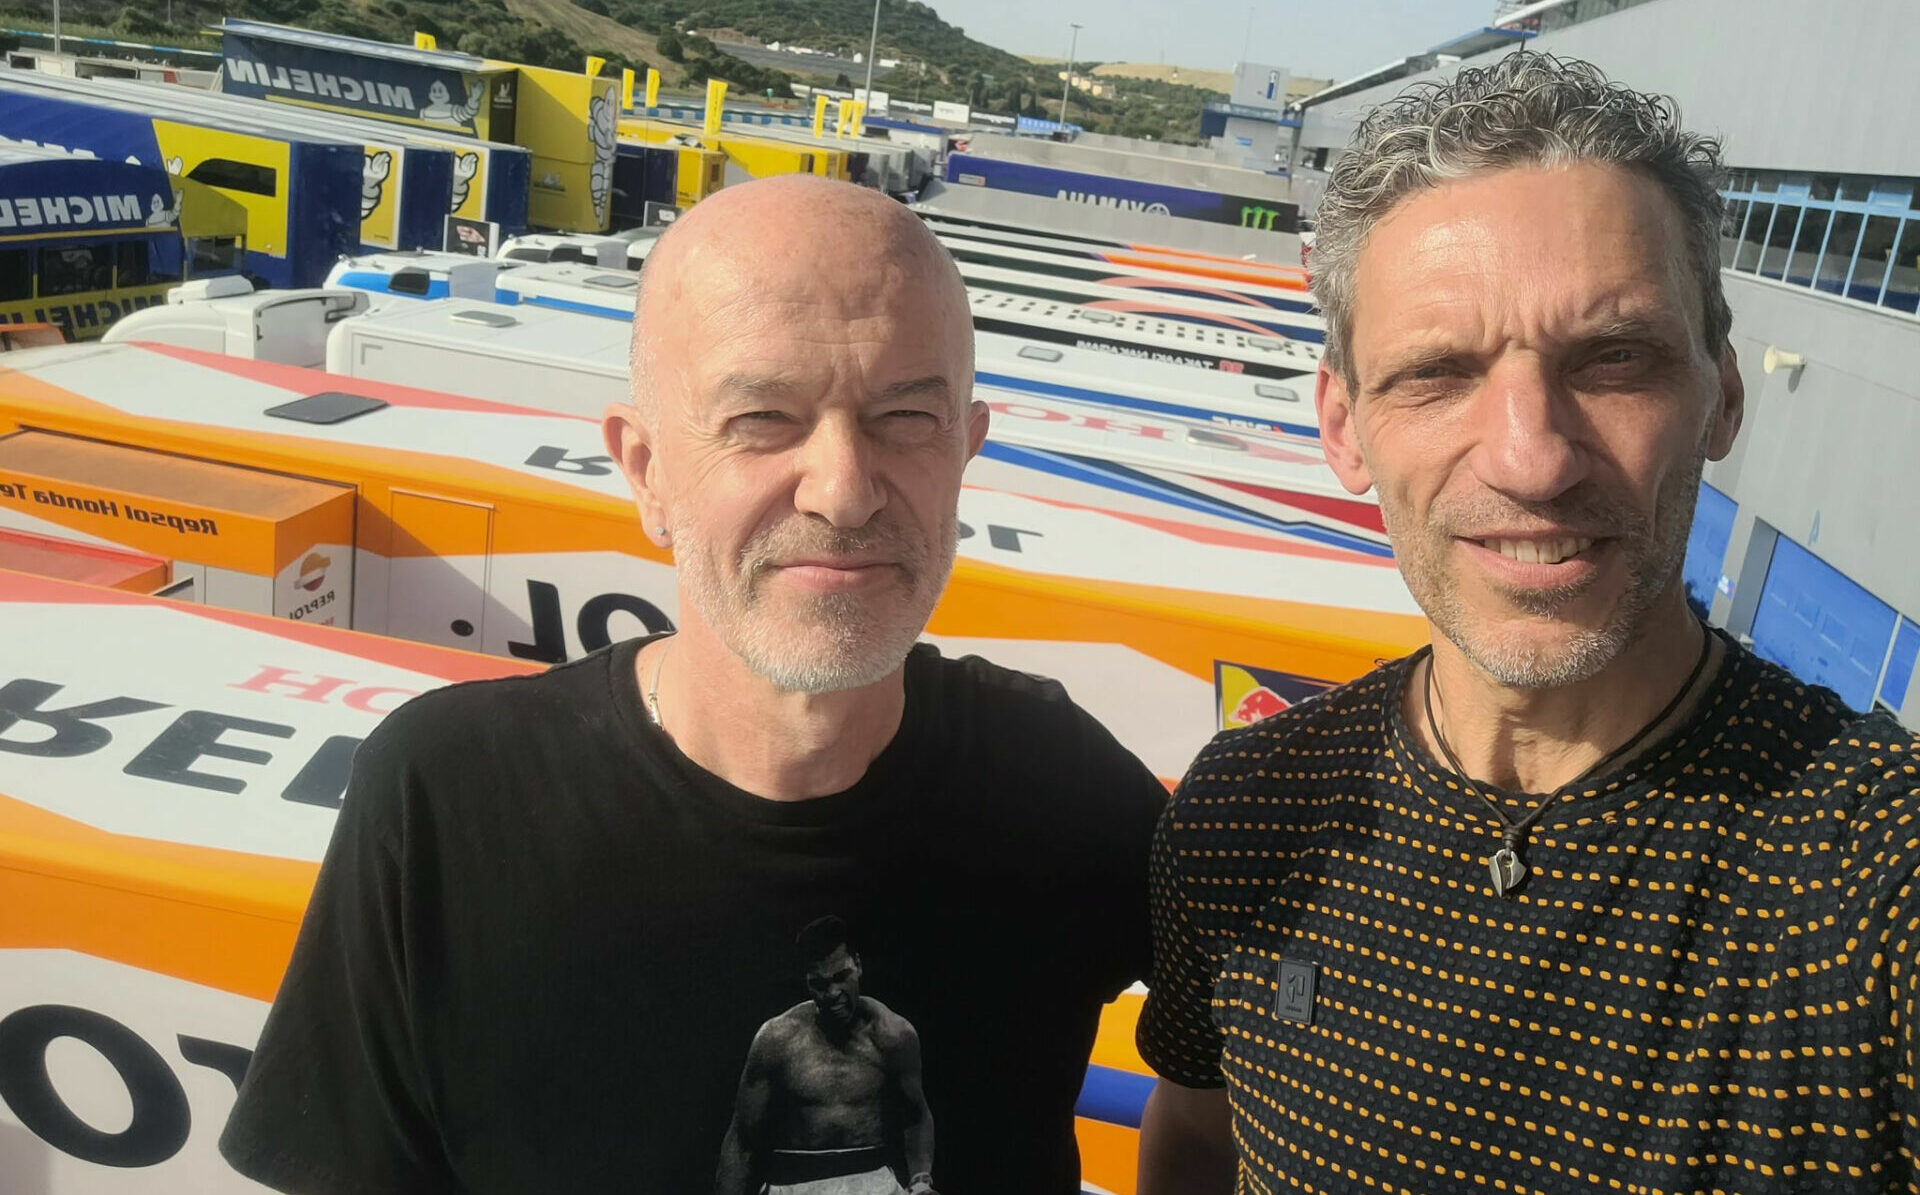 Roadracing World MotoGP Editor and Isle of Man TT winner Mat Oxley (left) and two-time World Championship-winning Crew Chief Peter Bom (right) in the paddock at Jerez. Photo courtesy Mat Oxley.